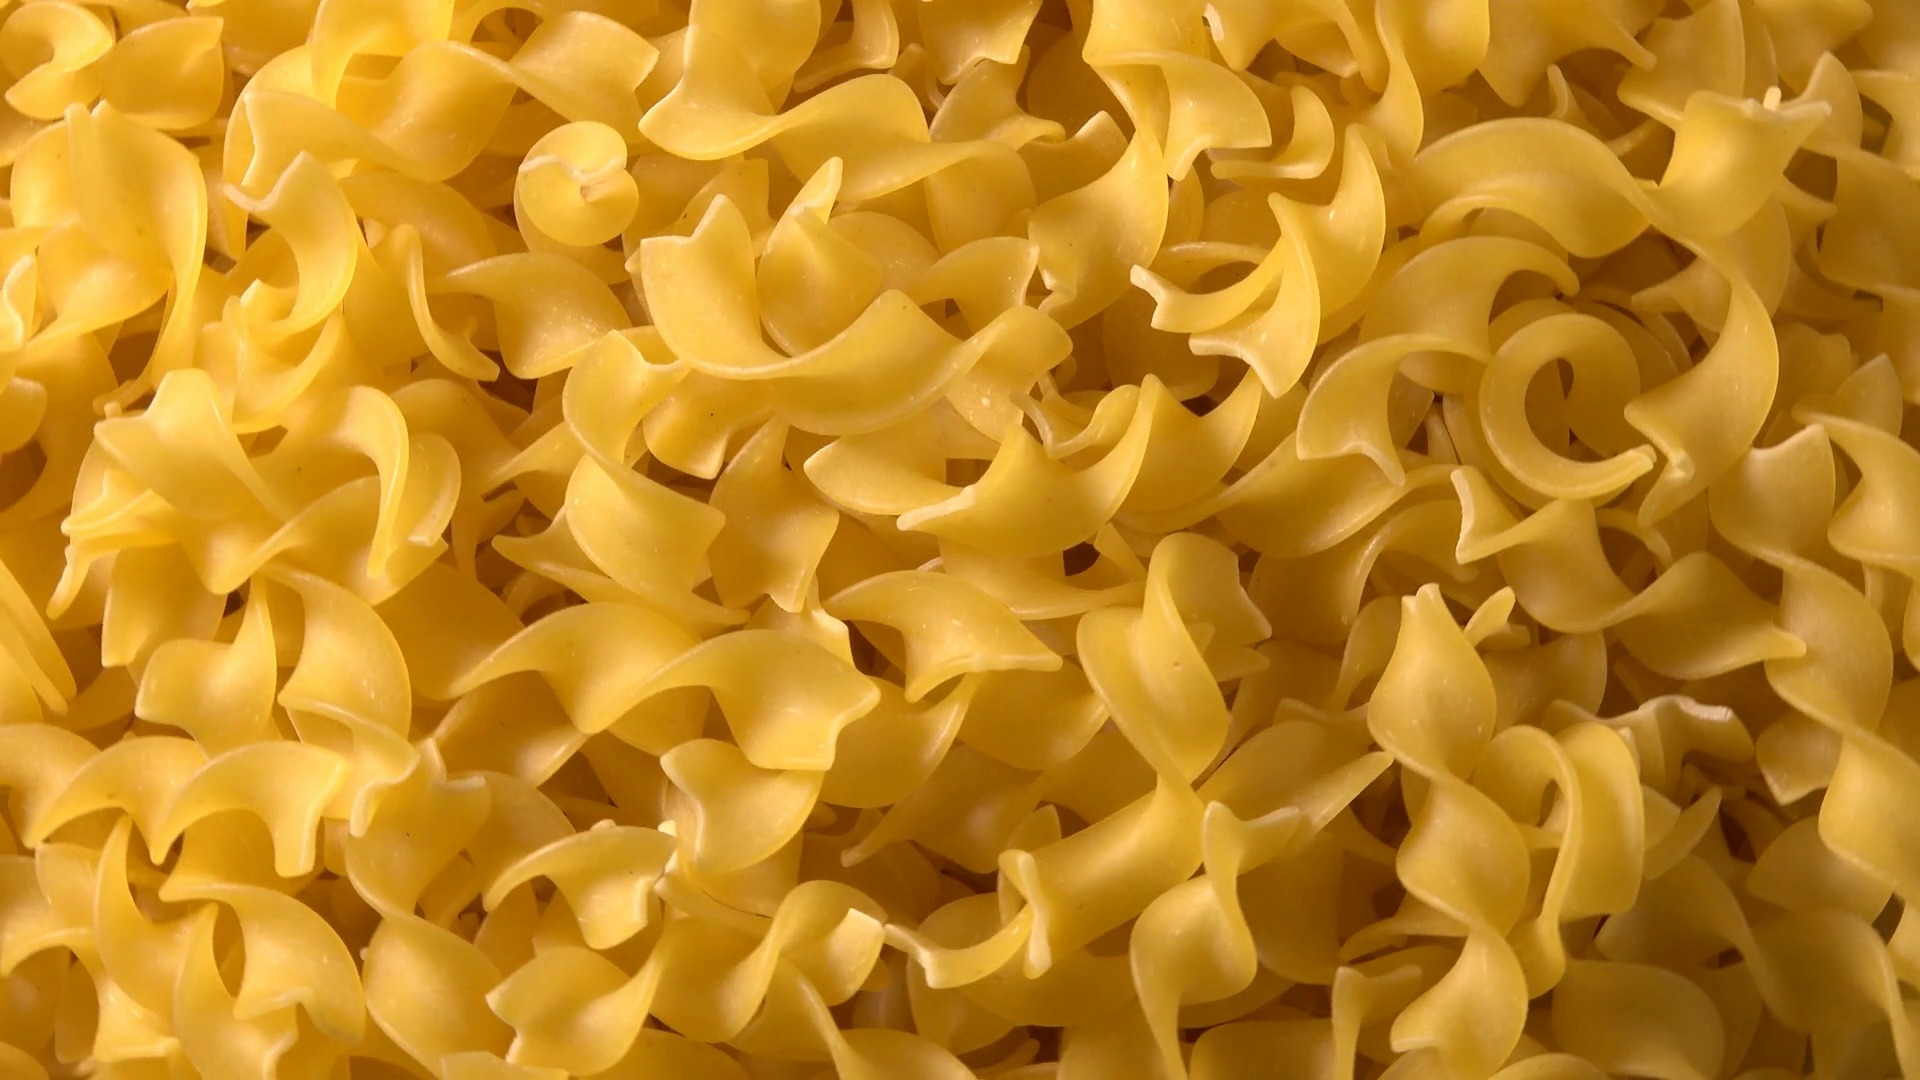 Full background of dry uncooked pasta, Food Stock Video Footage ...